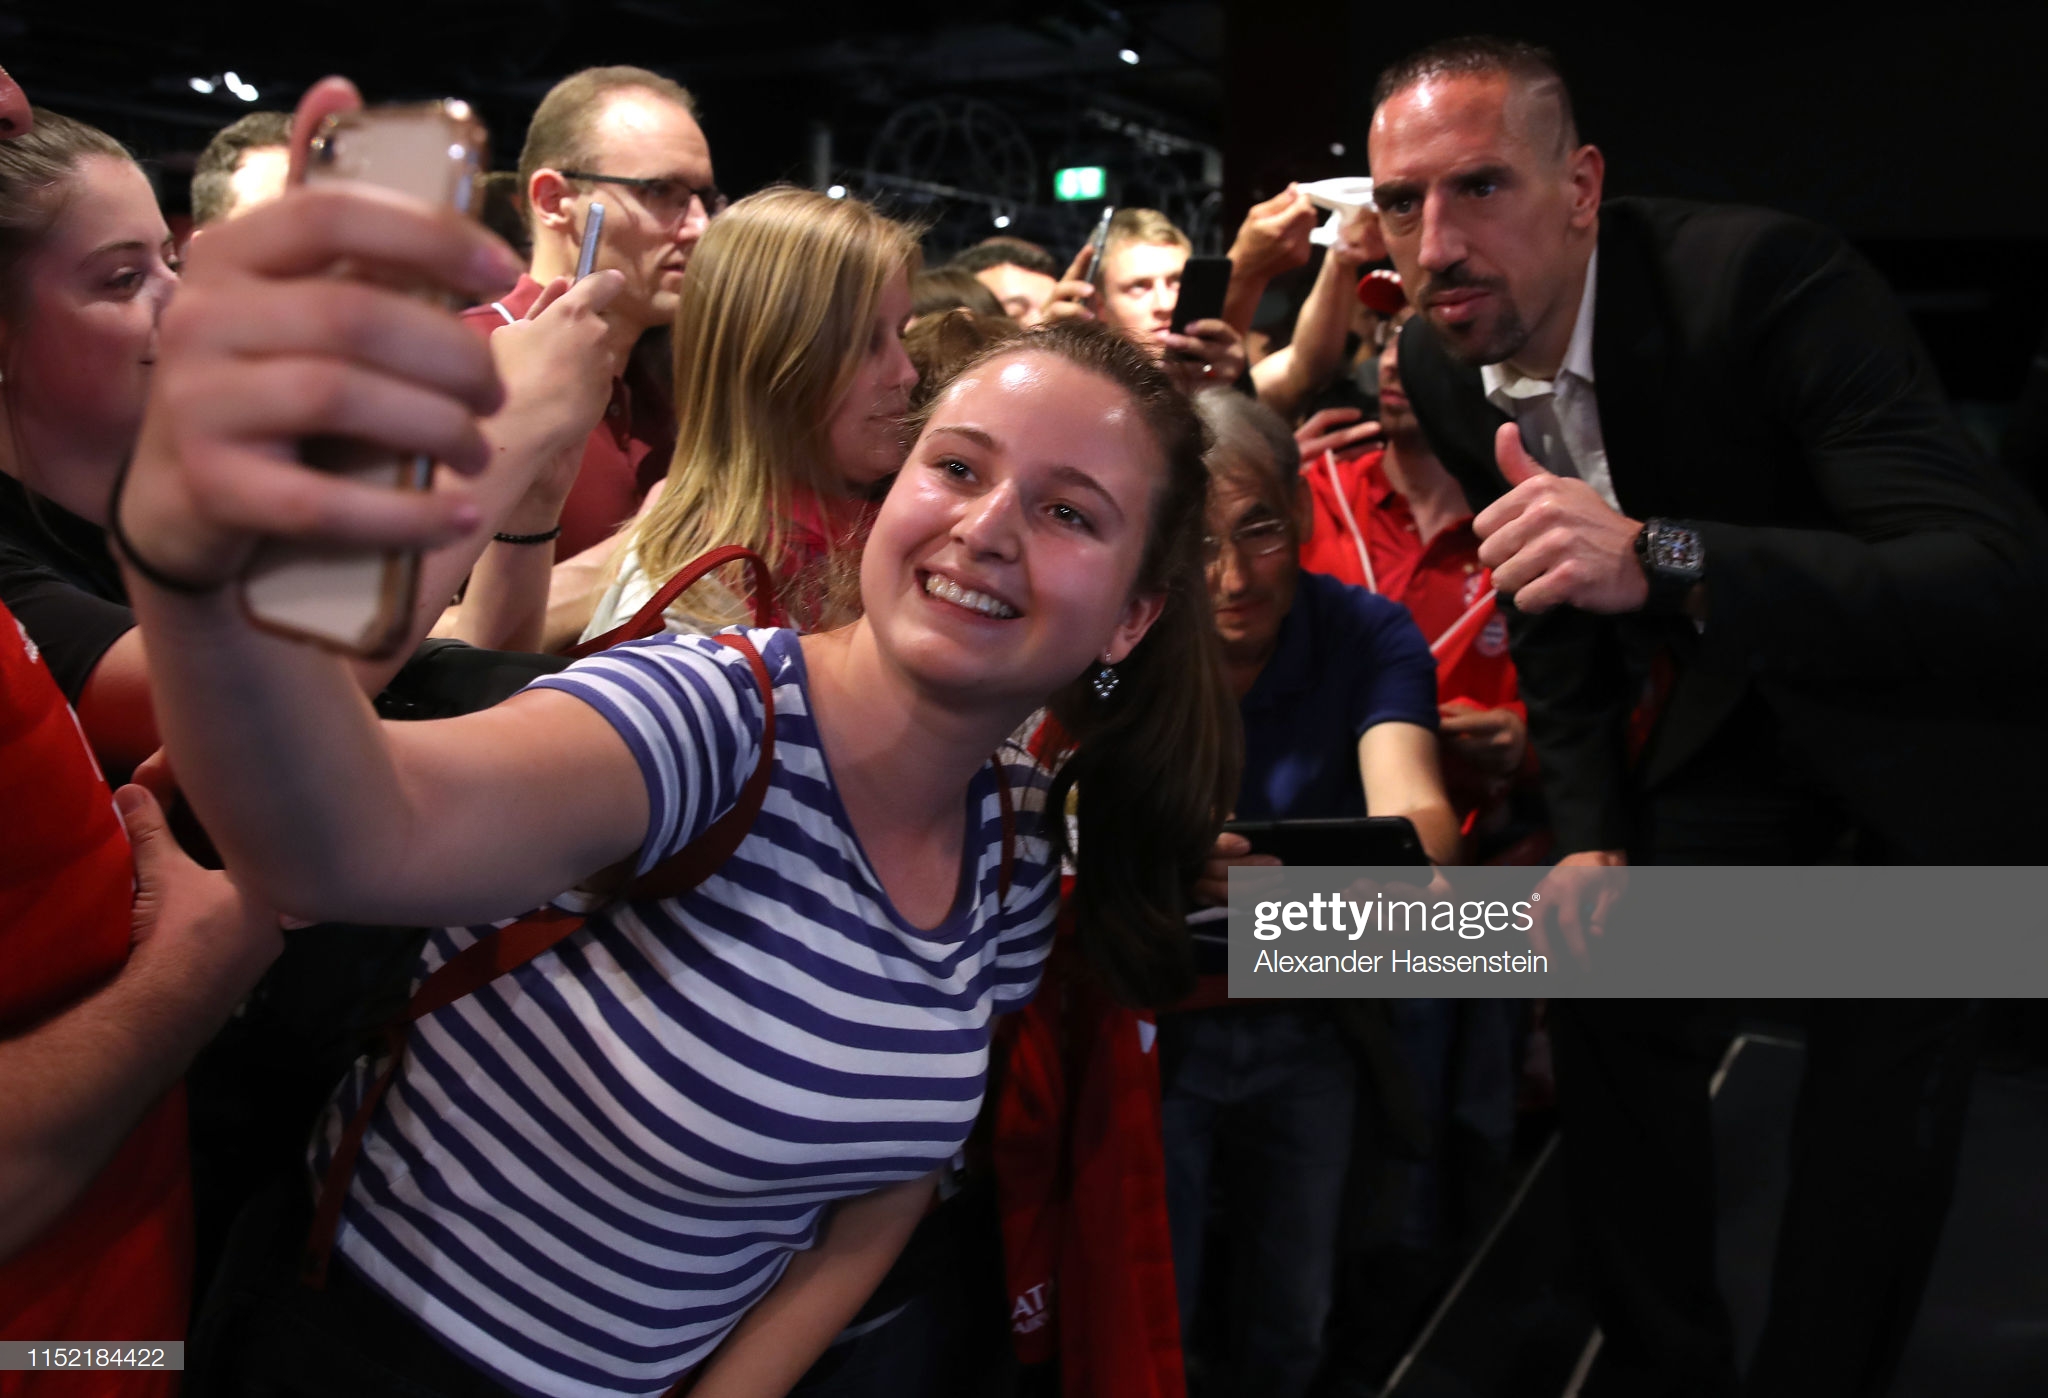 gettyimages-1152184422-2048x2048.jpg